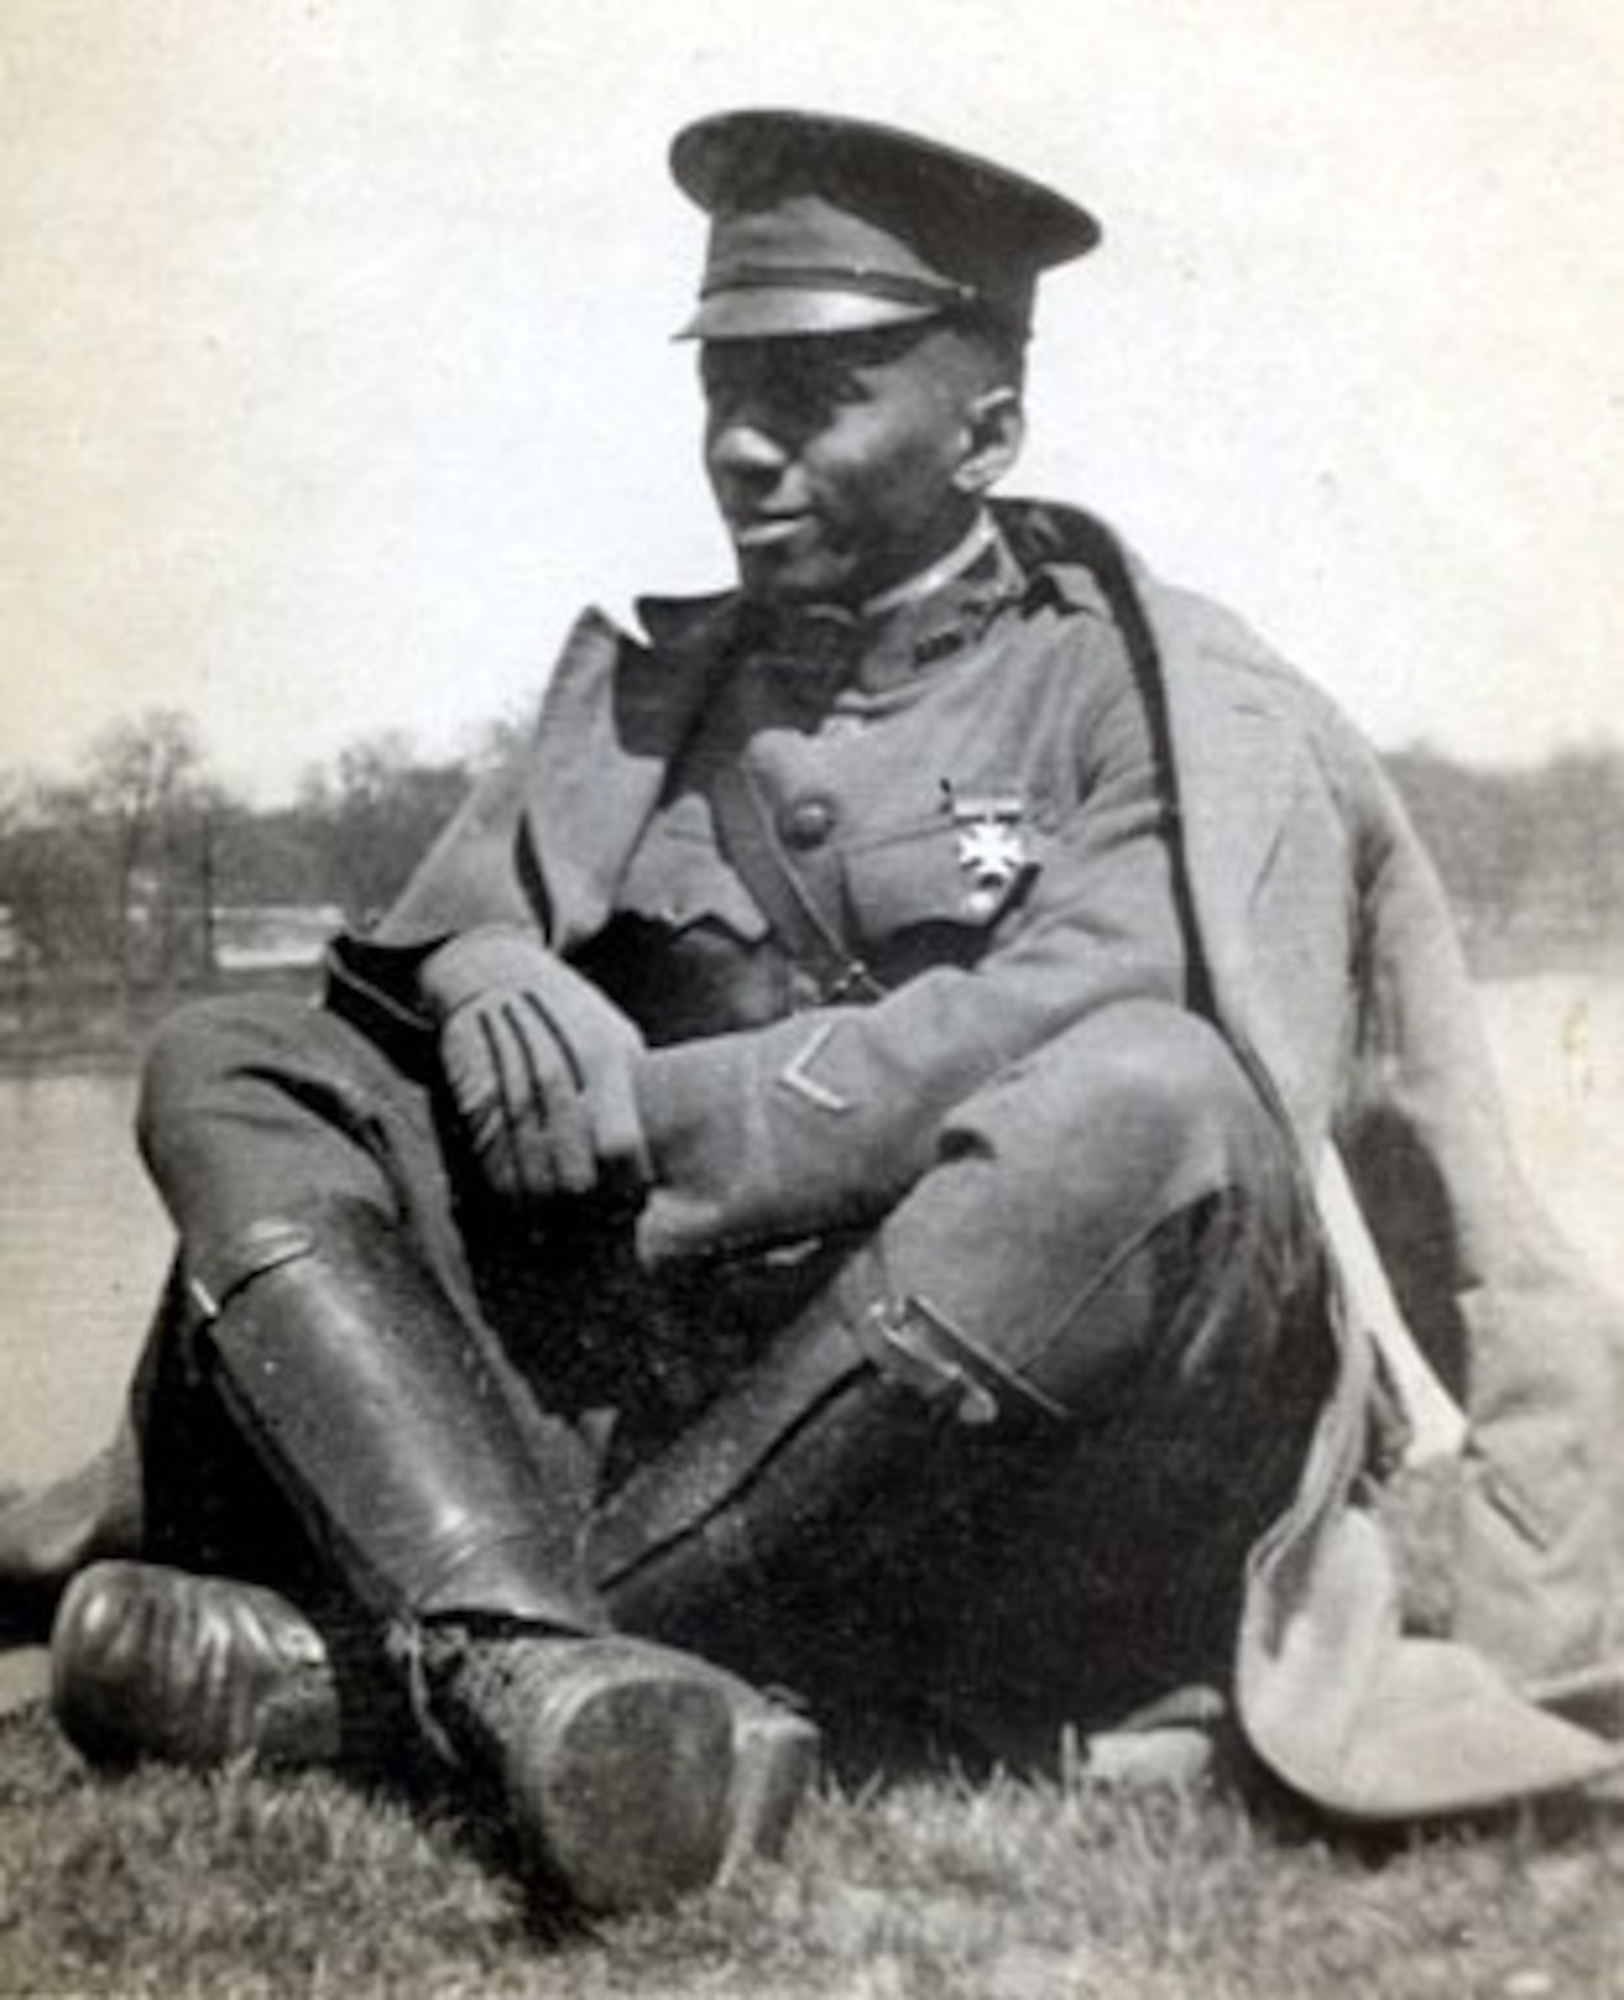 Lt. William J. Powell as an infantry officer during World War I.